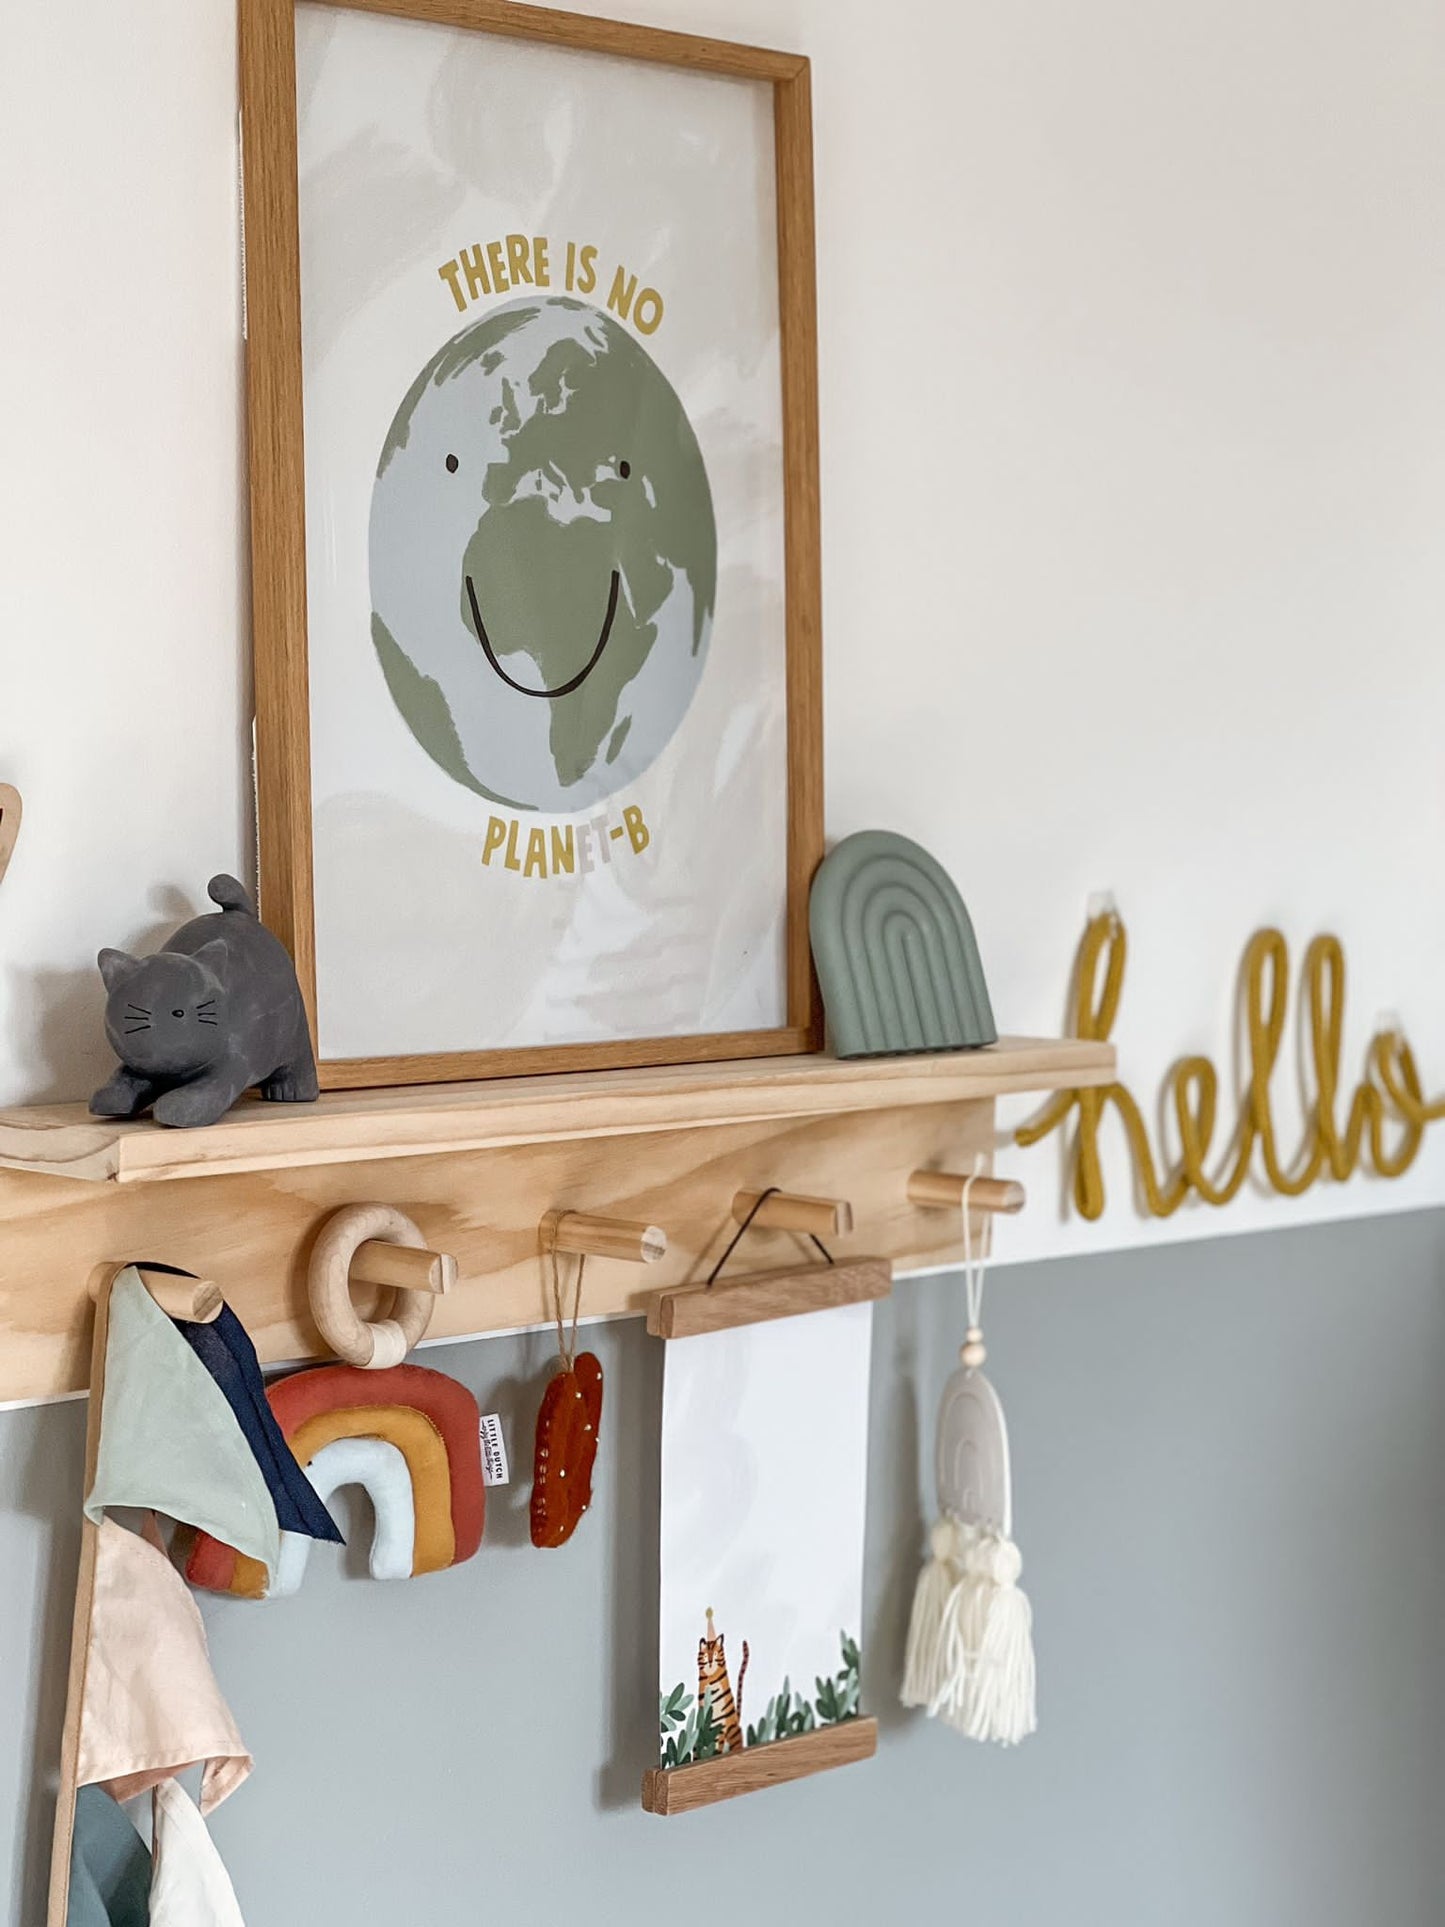 Load image into Gallery viewer, Minii &amp;amp; Maxii, One World A3 Print, There Is No Planet-B, Nottingham Kids Shop, Midlands Baby Shop, Nursery Decor, Children’s Playroom Print
